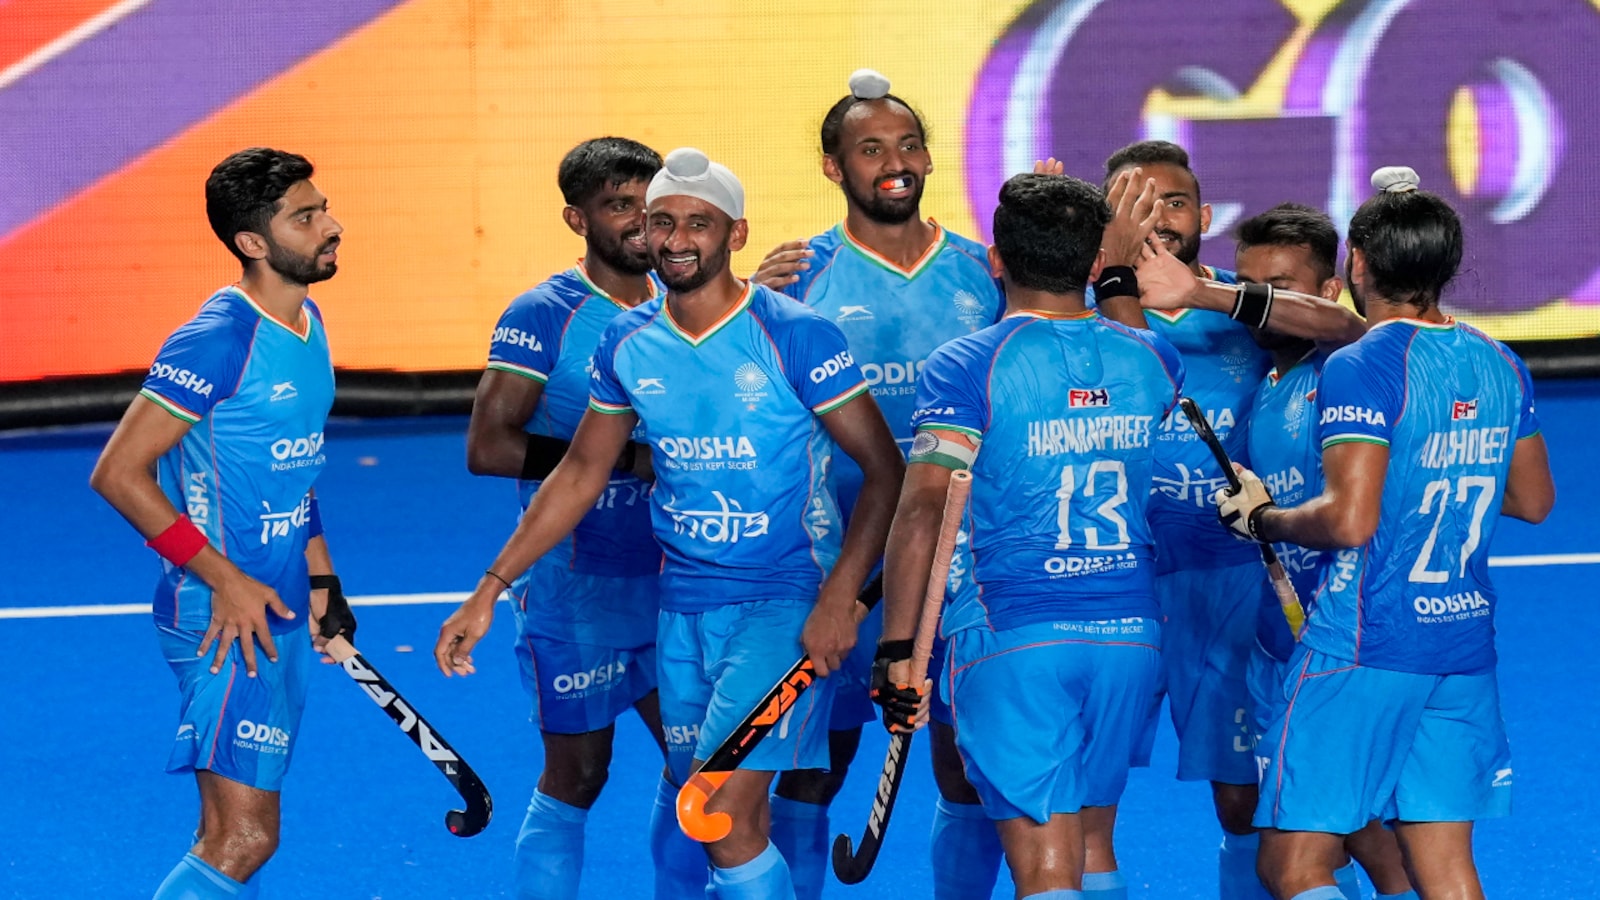 Asian Games hockey: Indian men's team clubbed with Pakistan